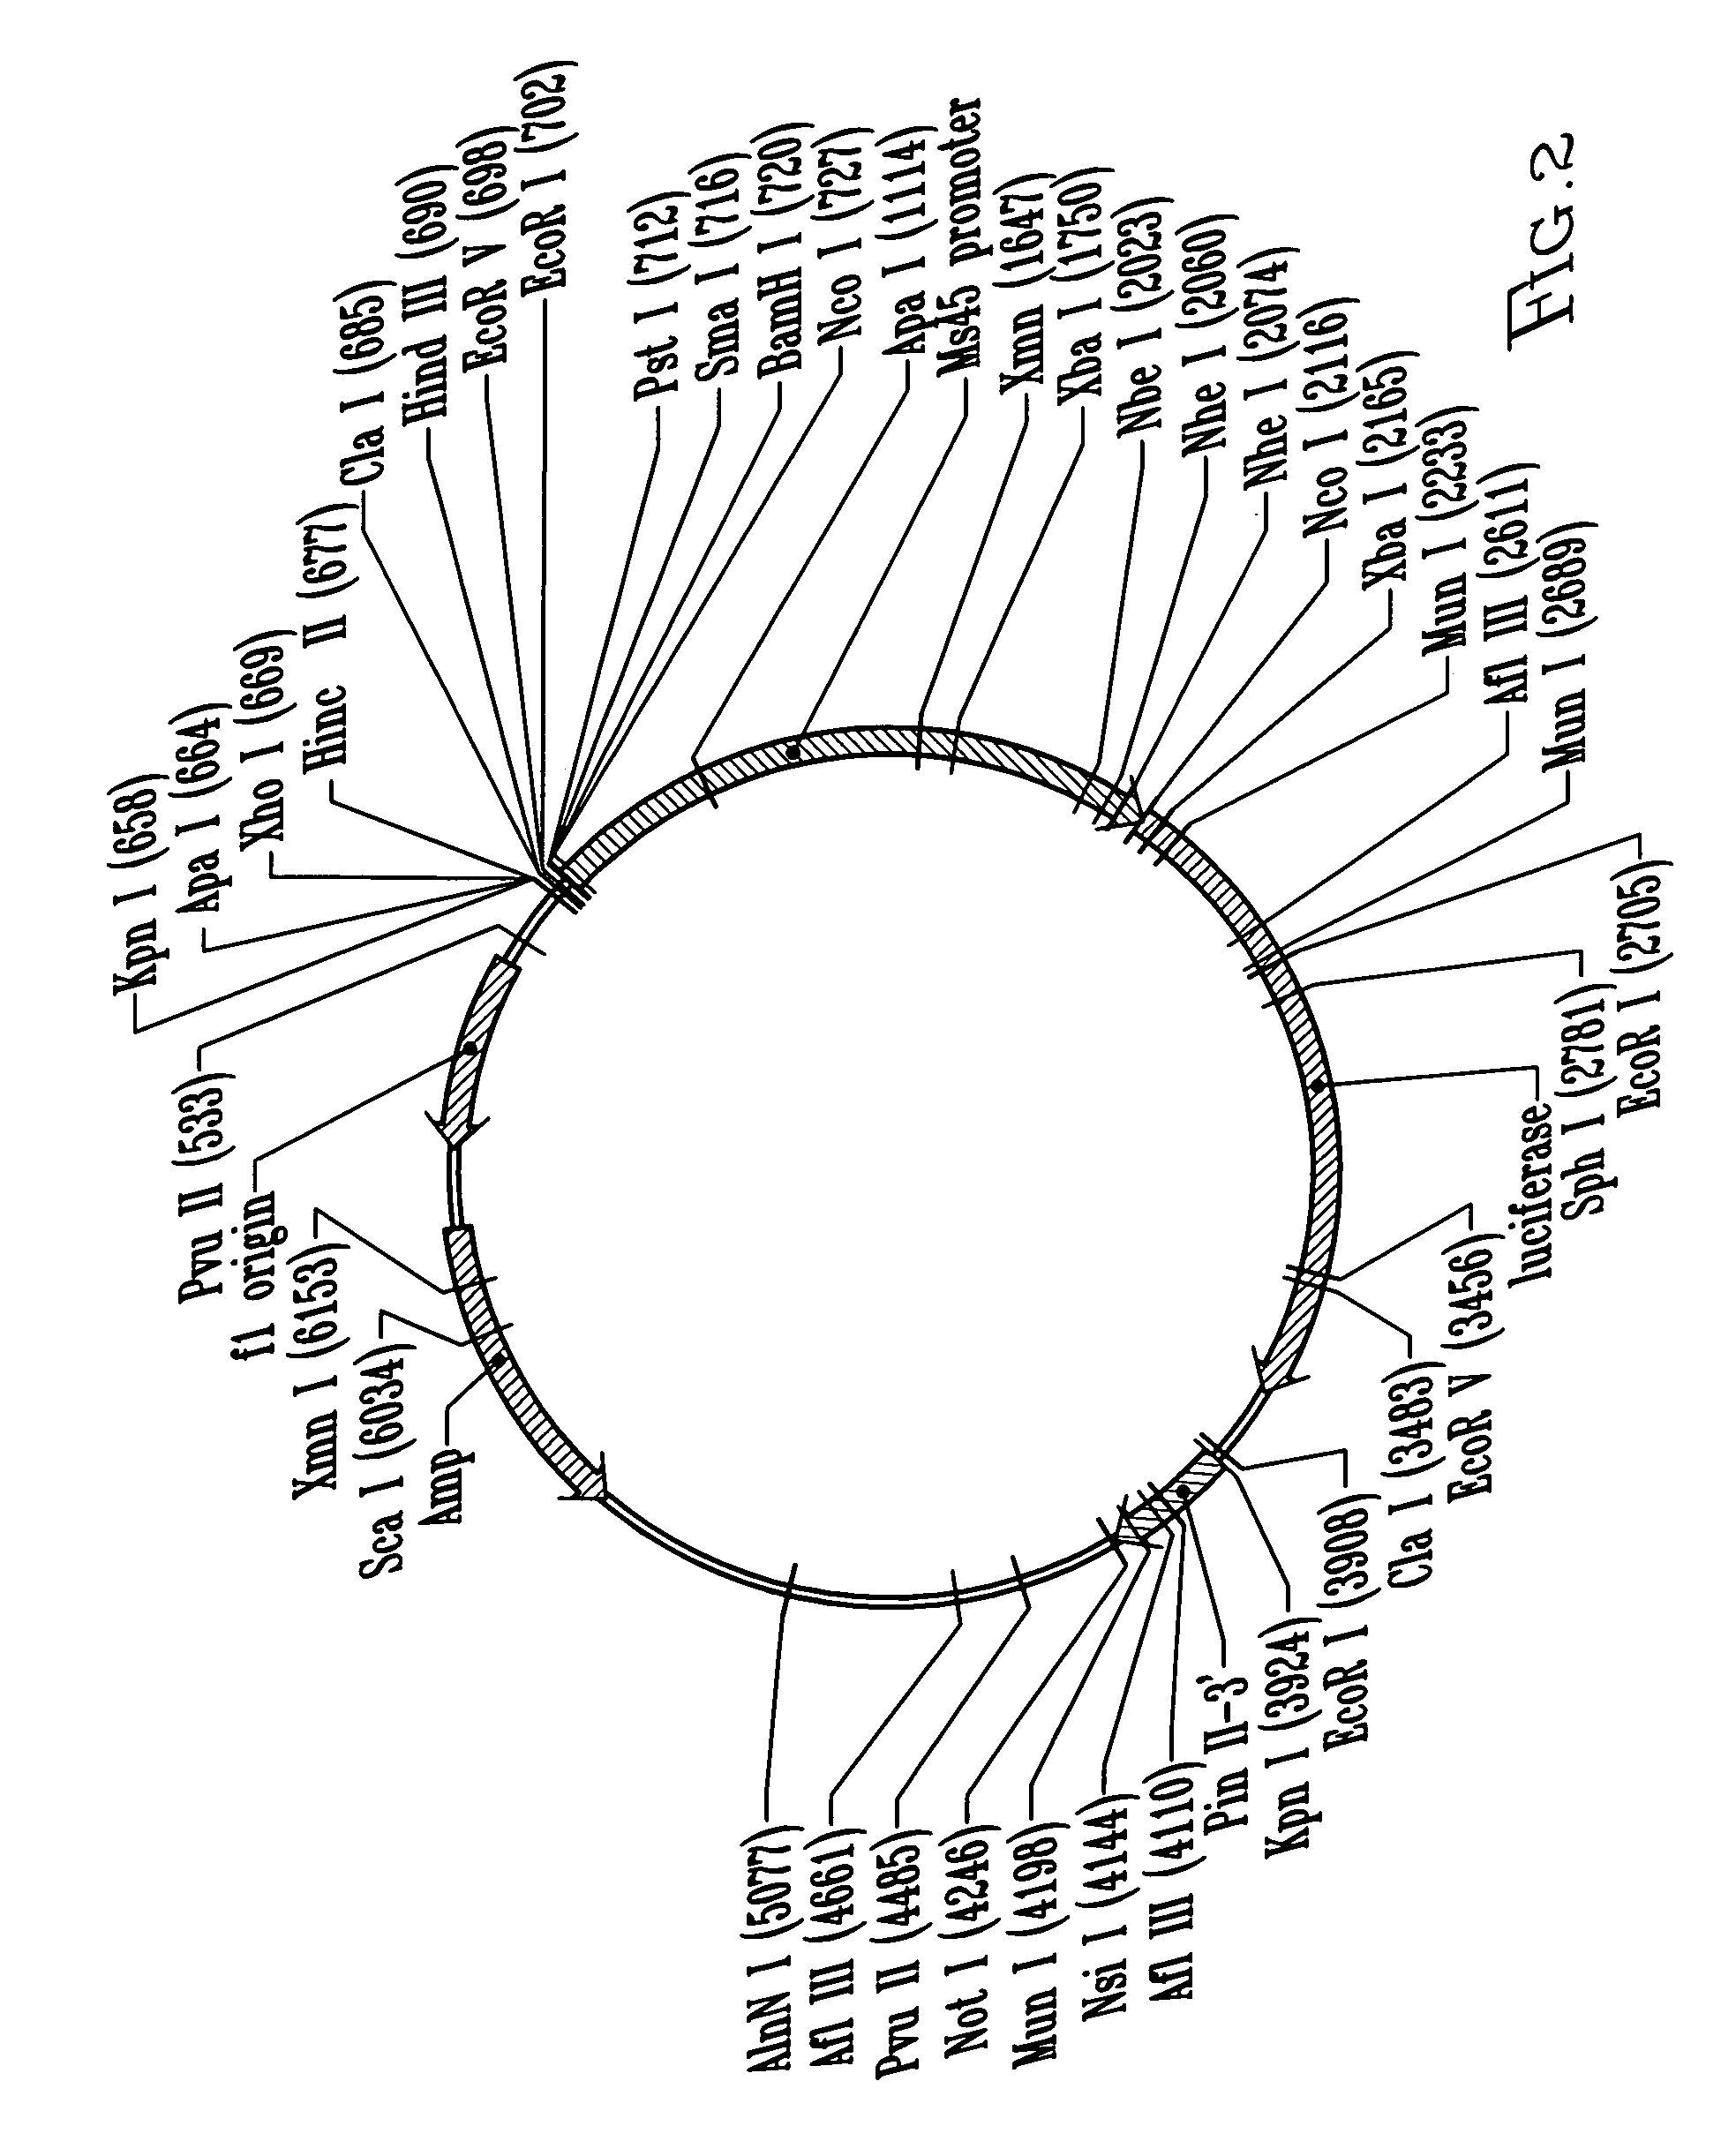 Male tissue-preferred regulatory sequences of Ms45 gene and method of using same